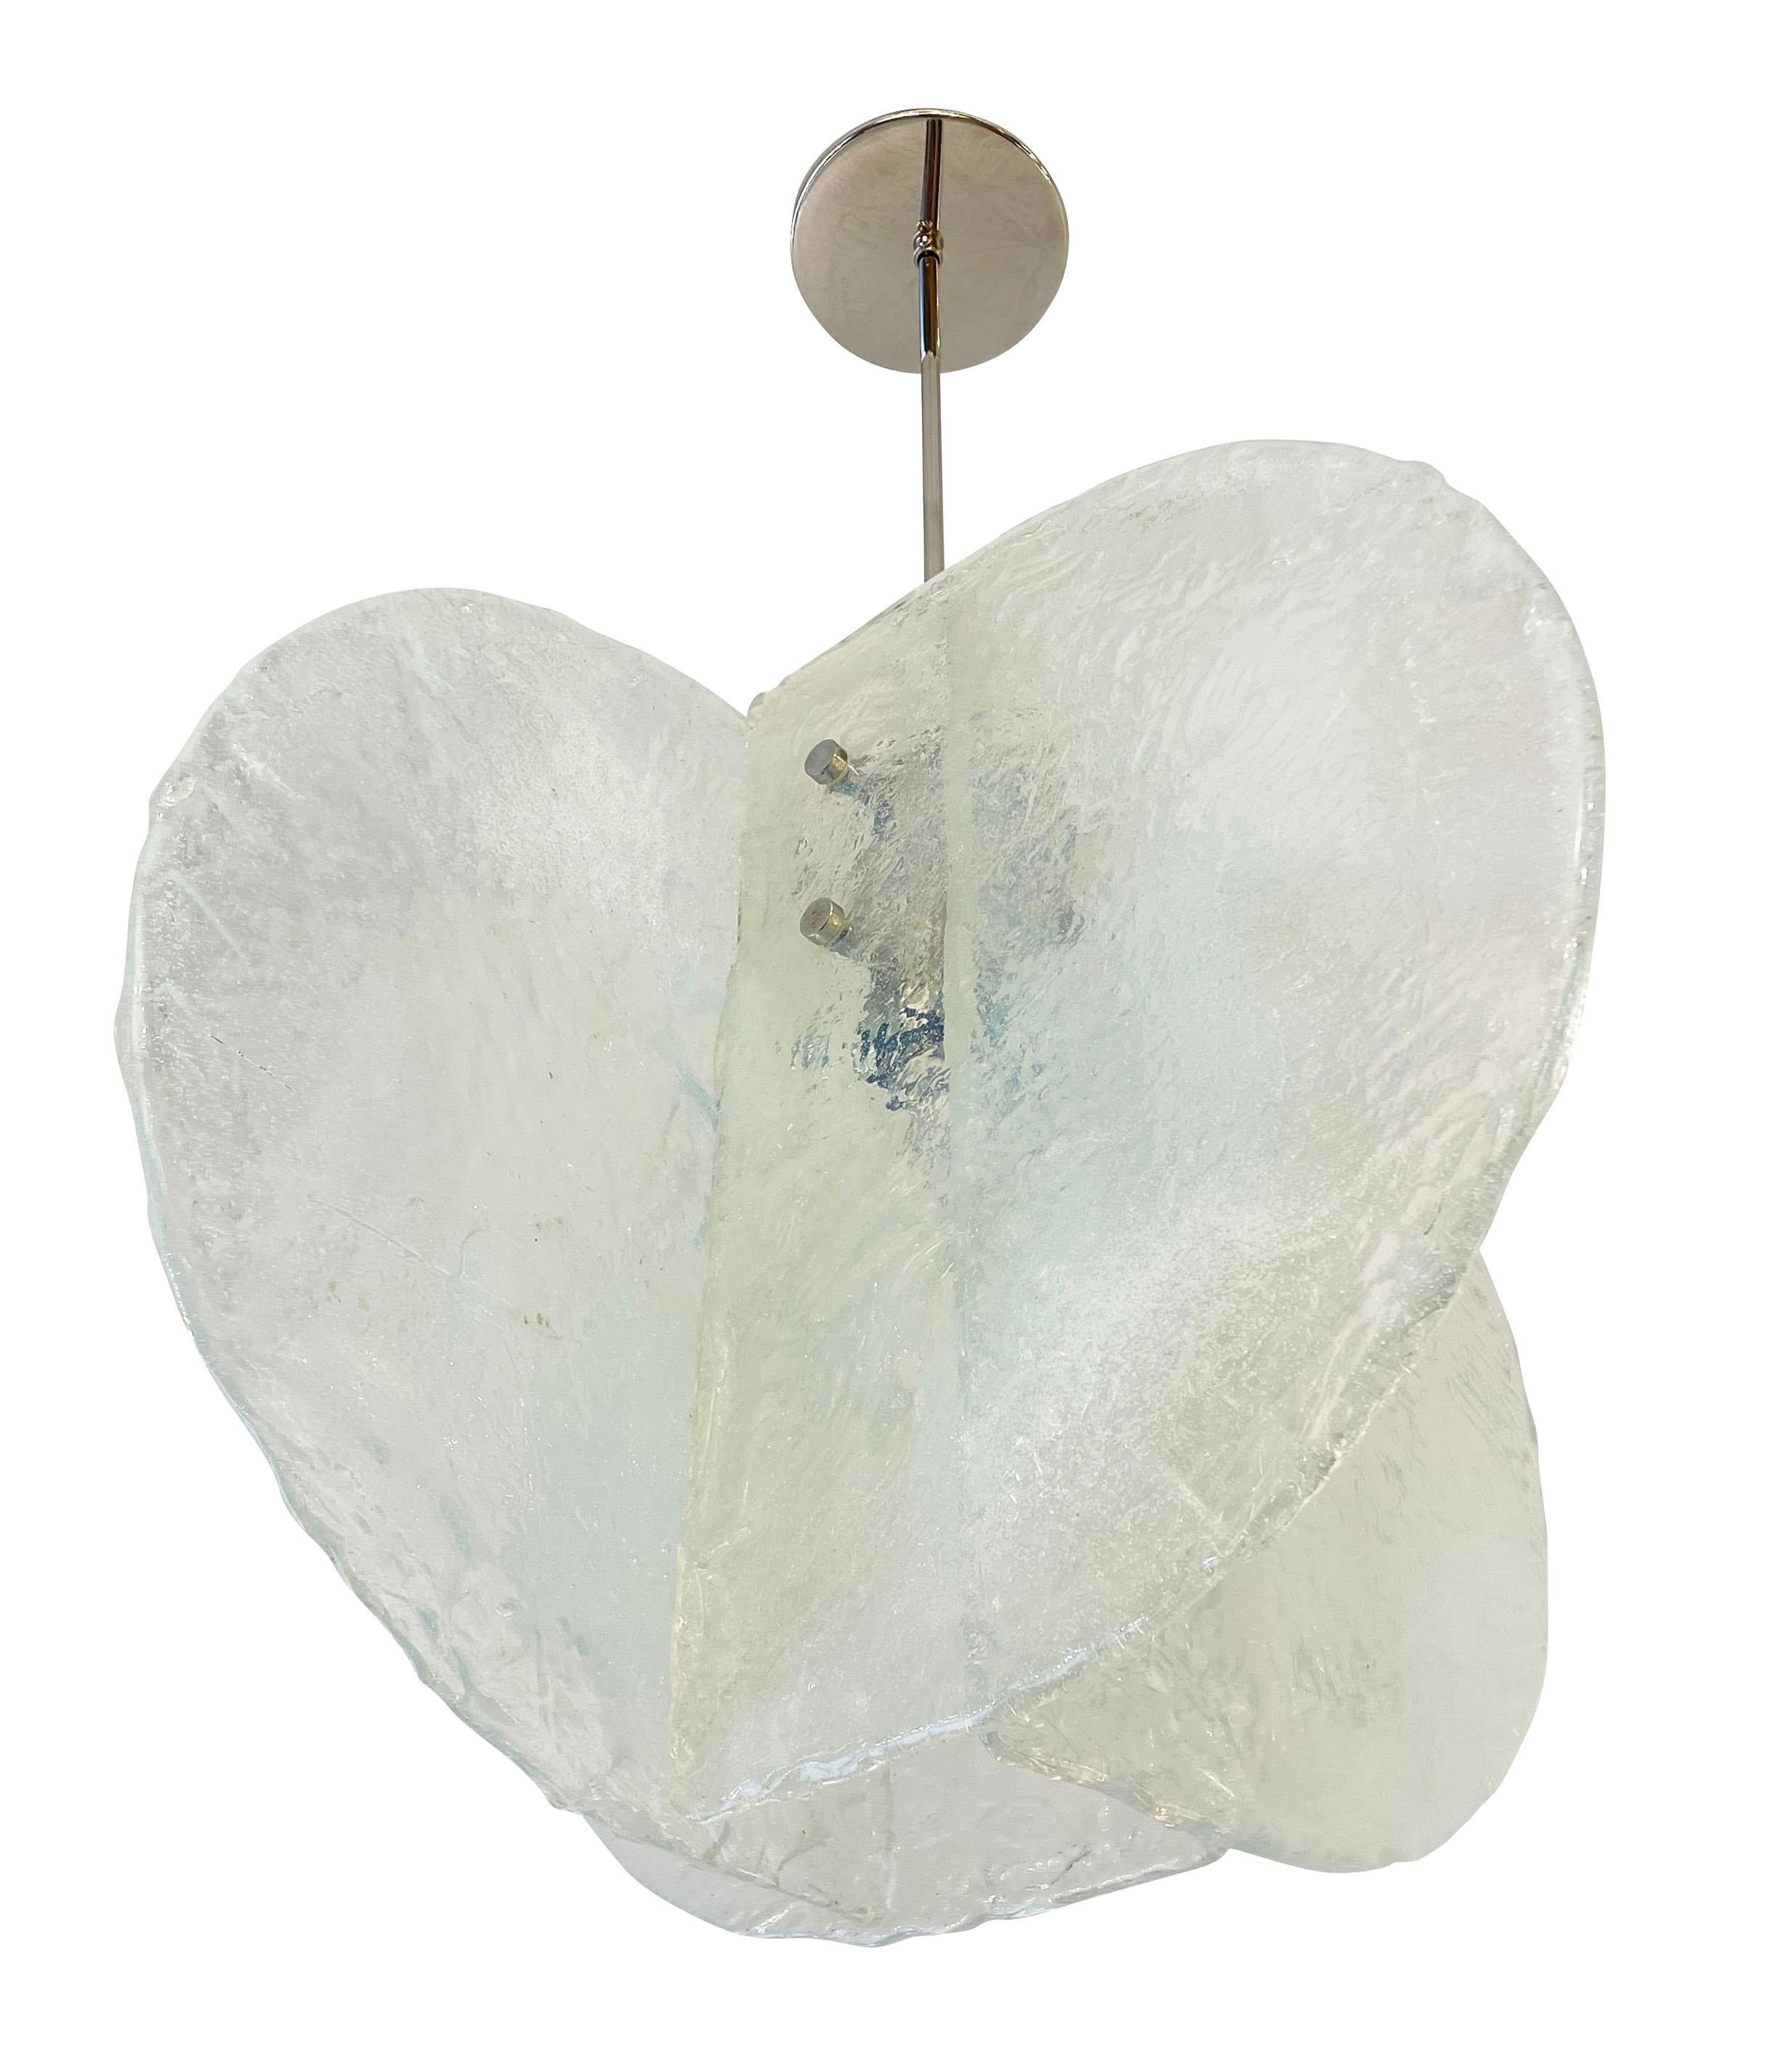 Stunning pendant composed of four textured hand blown glass slabs connected by nickel joints. The glass is iridescent with a light blue coloration. Length of stem can be adjusted as needed. Holds one E26 socket.

Condition: Excellent vintage